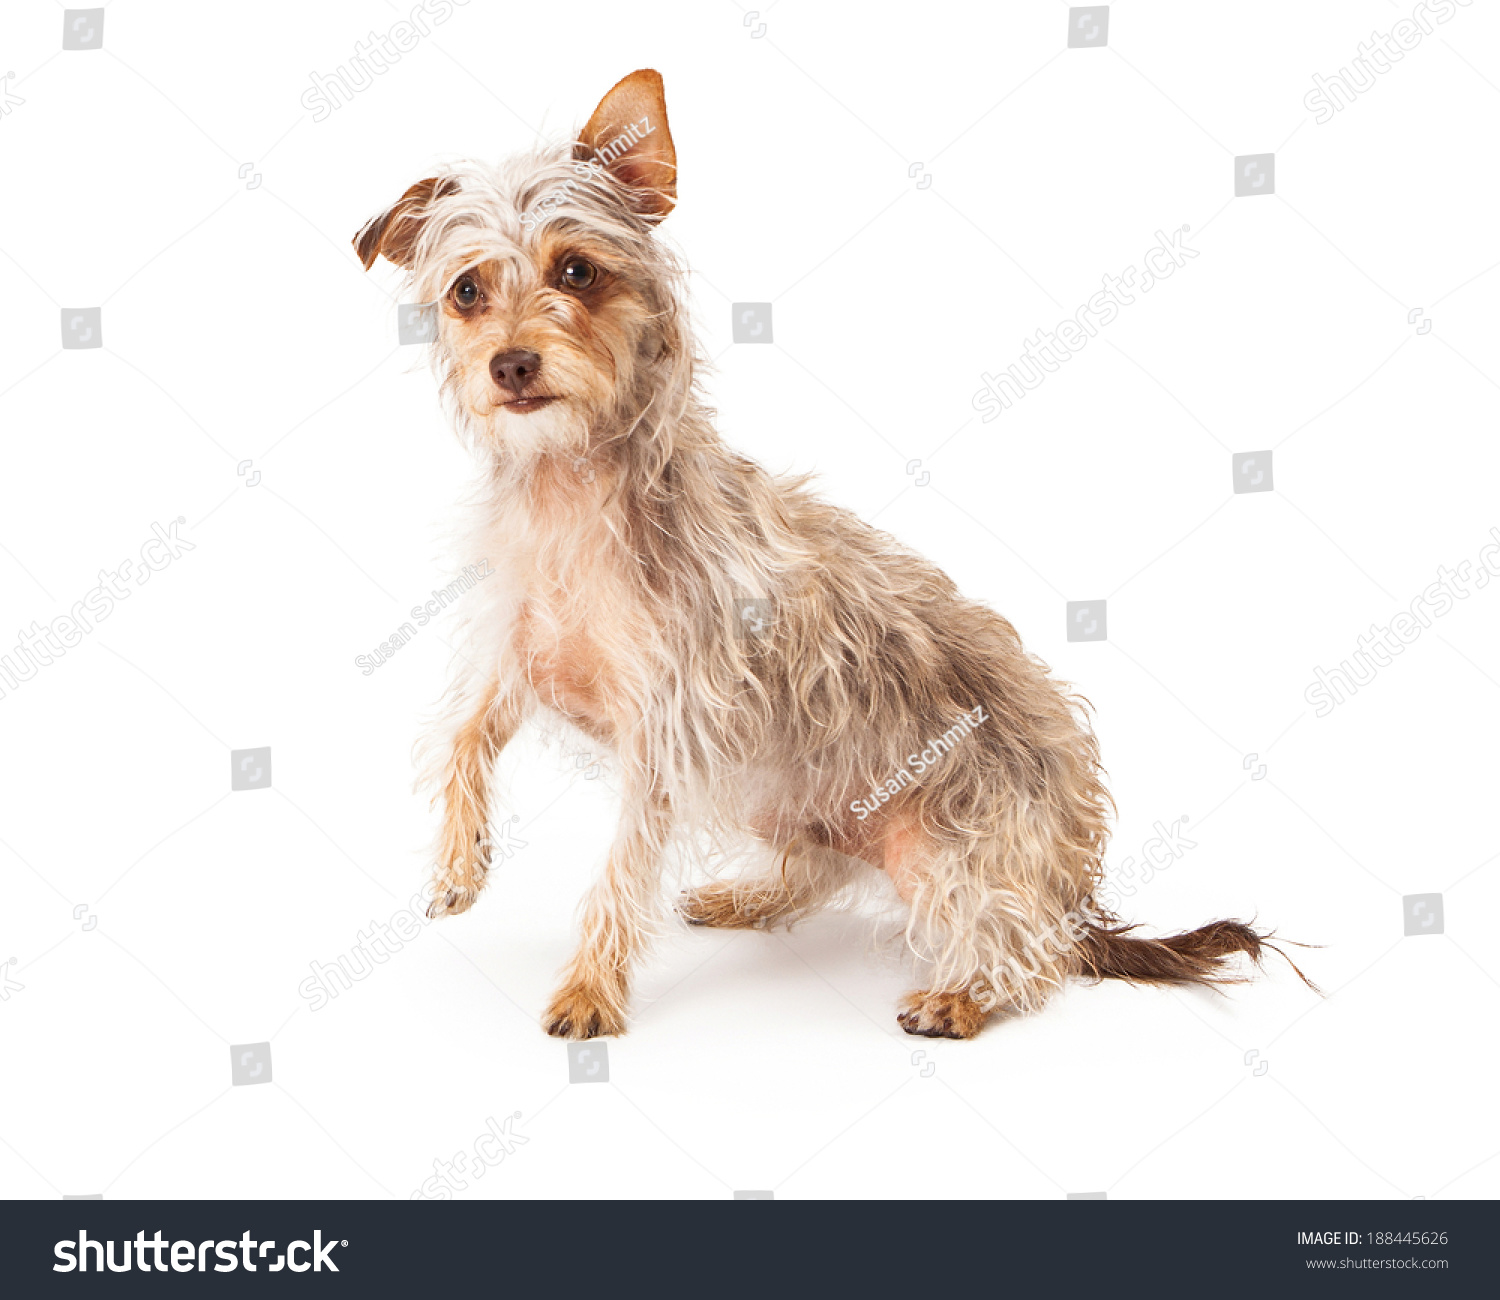 What are the different types of wire-haired terriers?